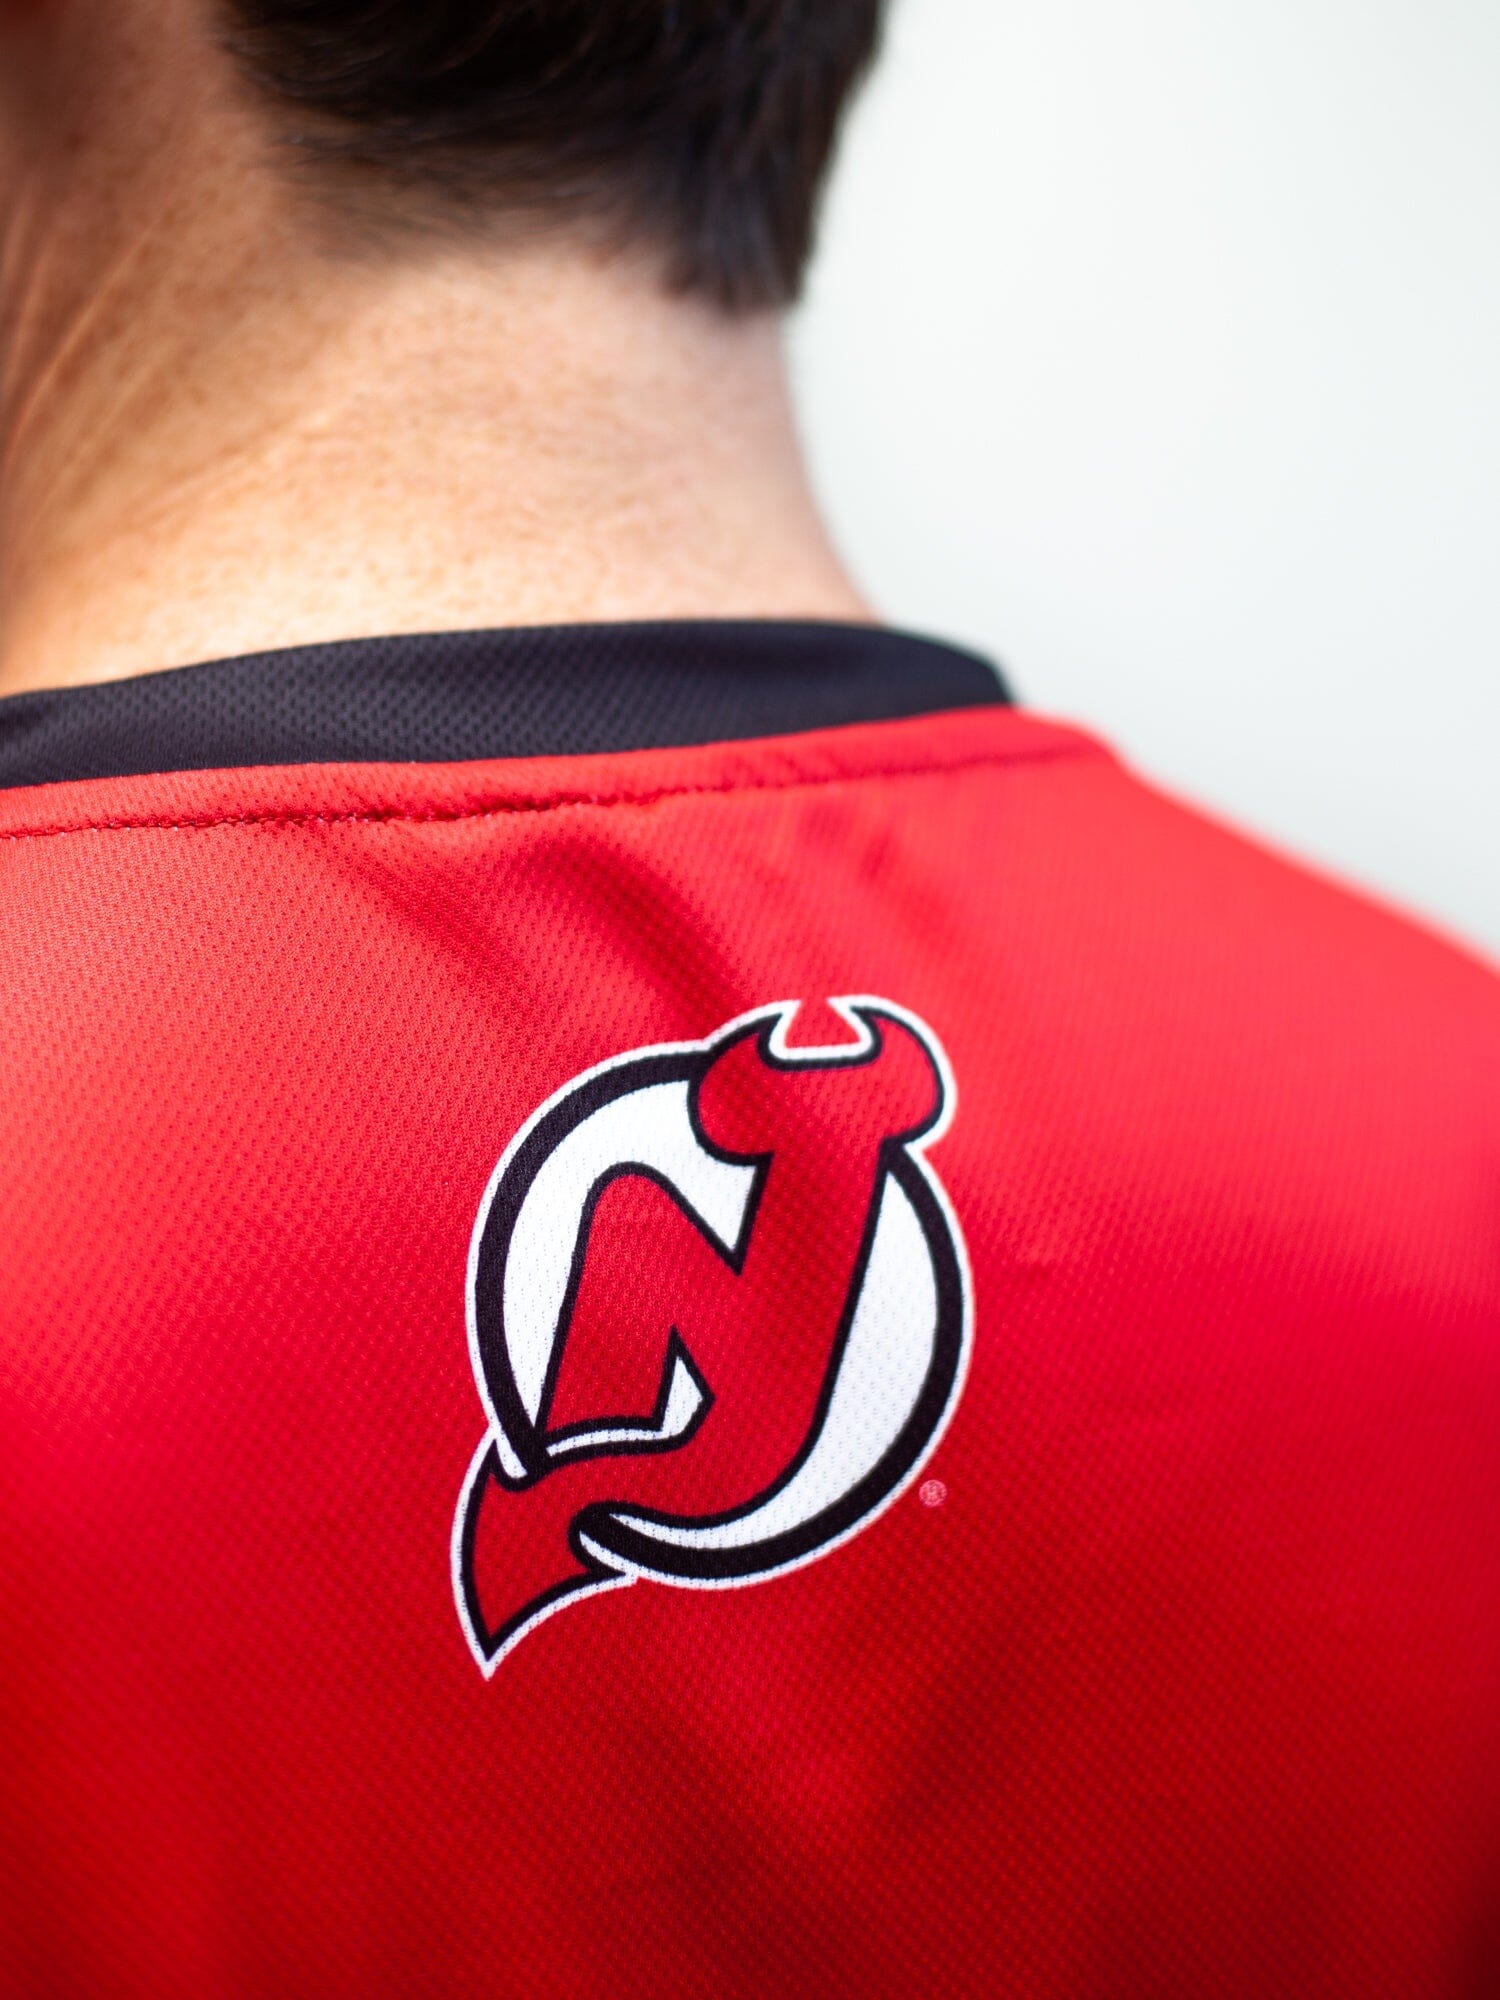 New Jersey Devils T-Shirts for Sale